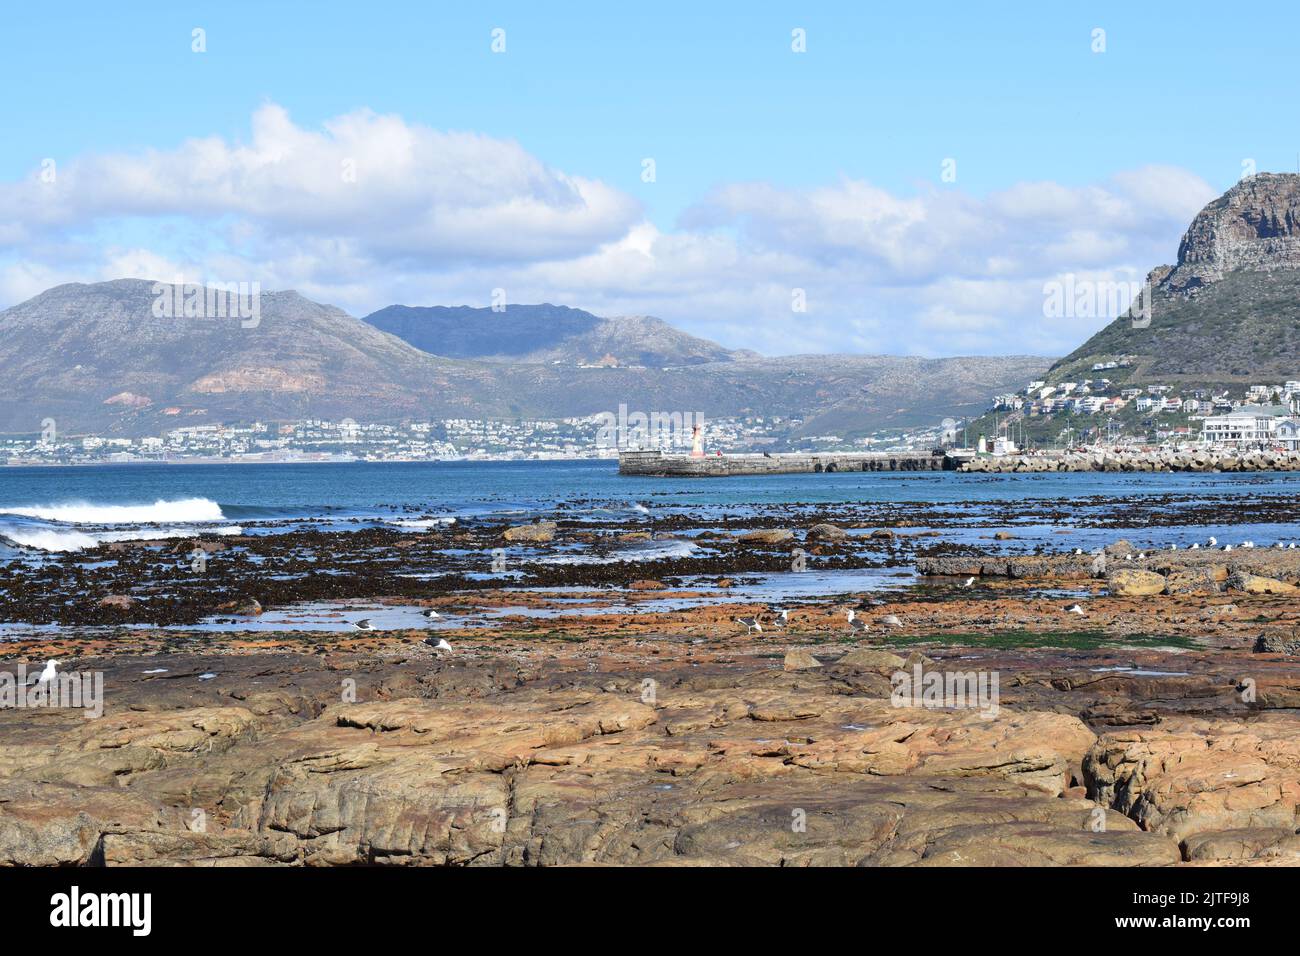 View from Dalebrook Tidal Pool of the ocean and landscape from Kalk Bay to Simon's Town on a mild, clear winters day Stock Photo